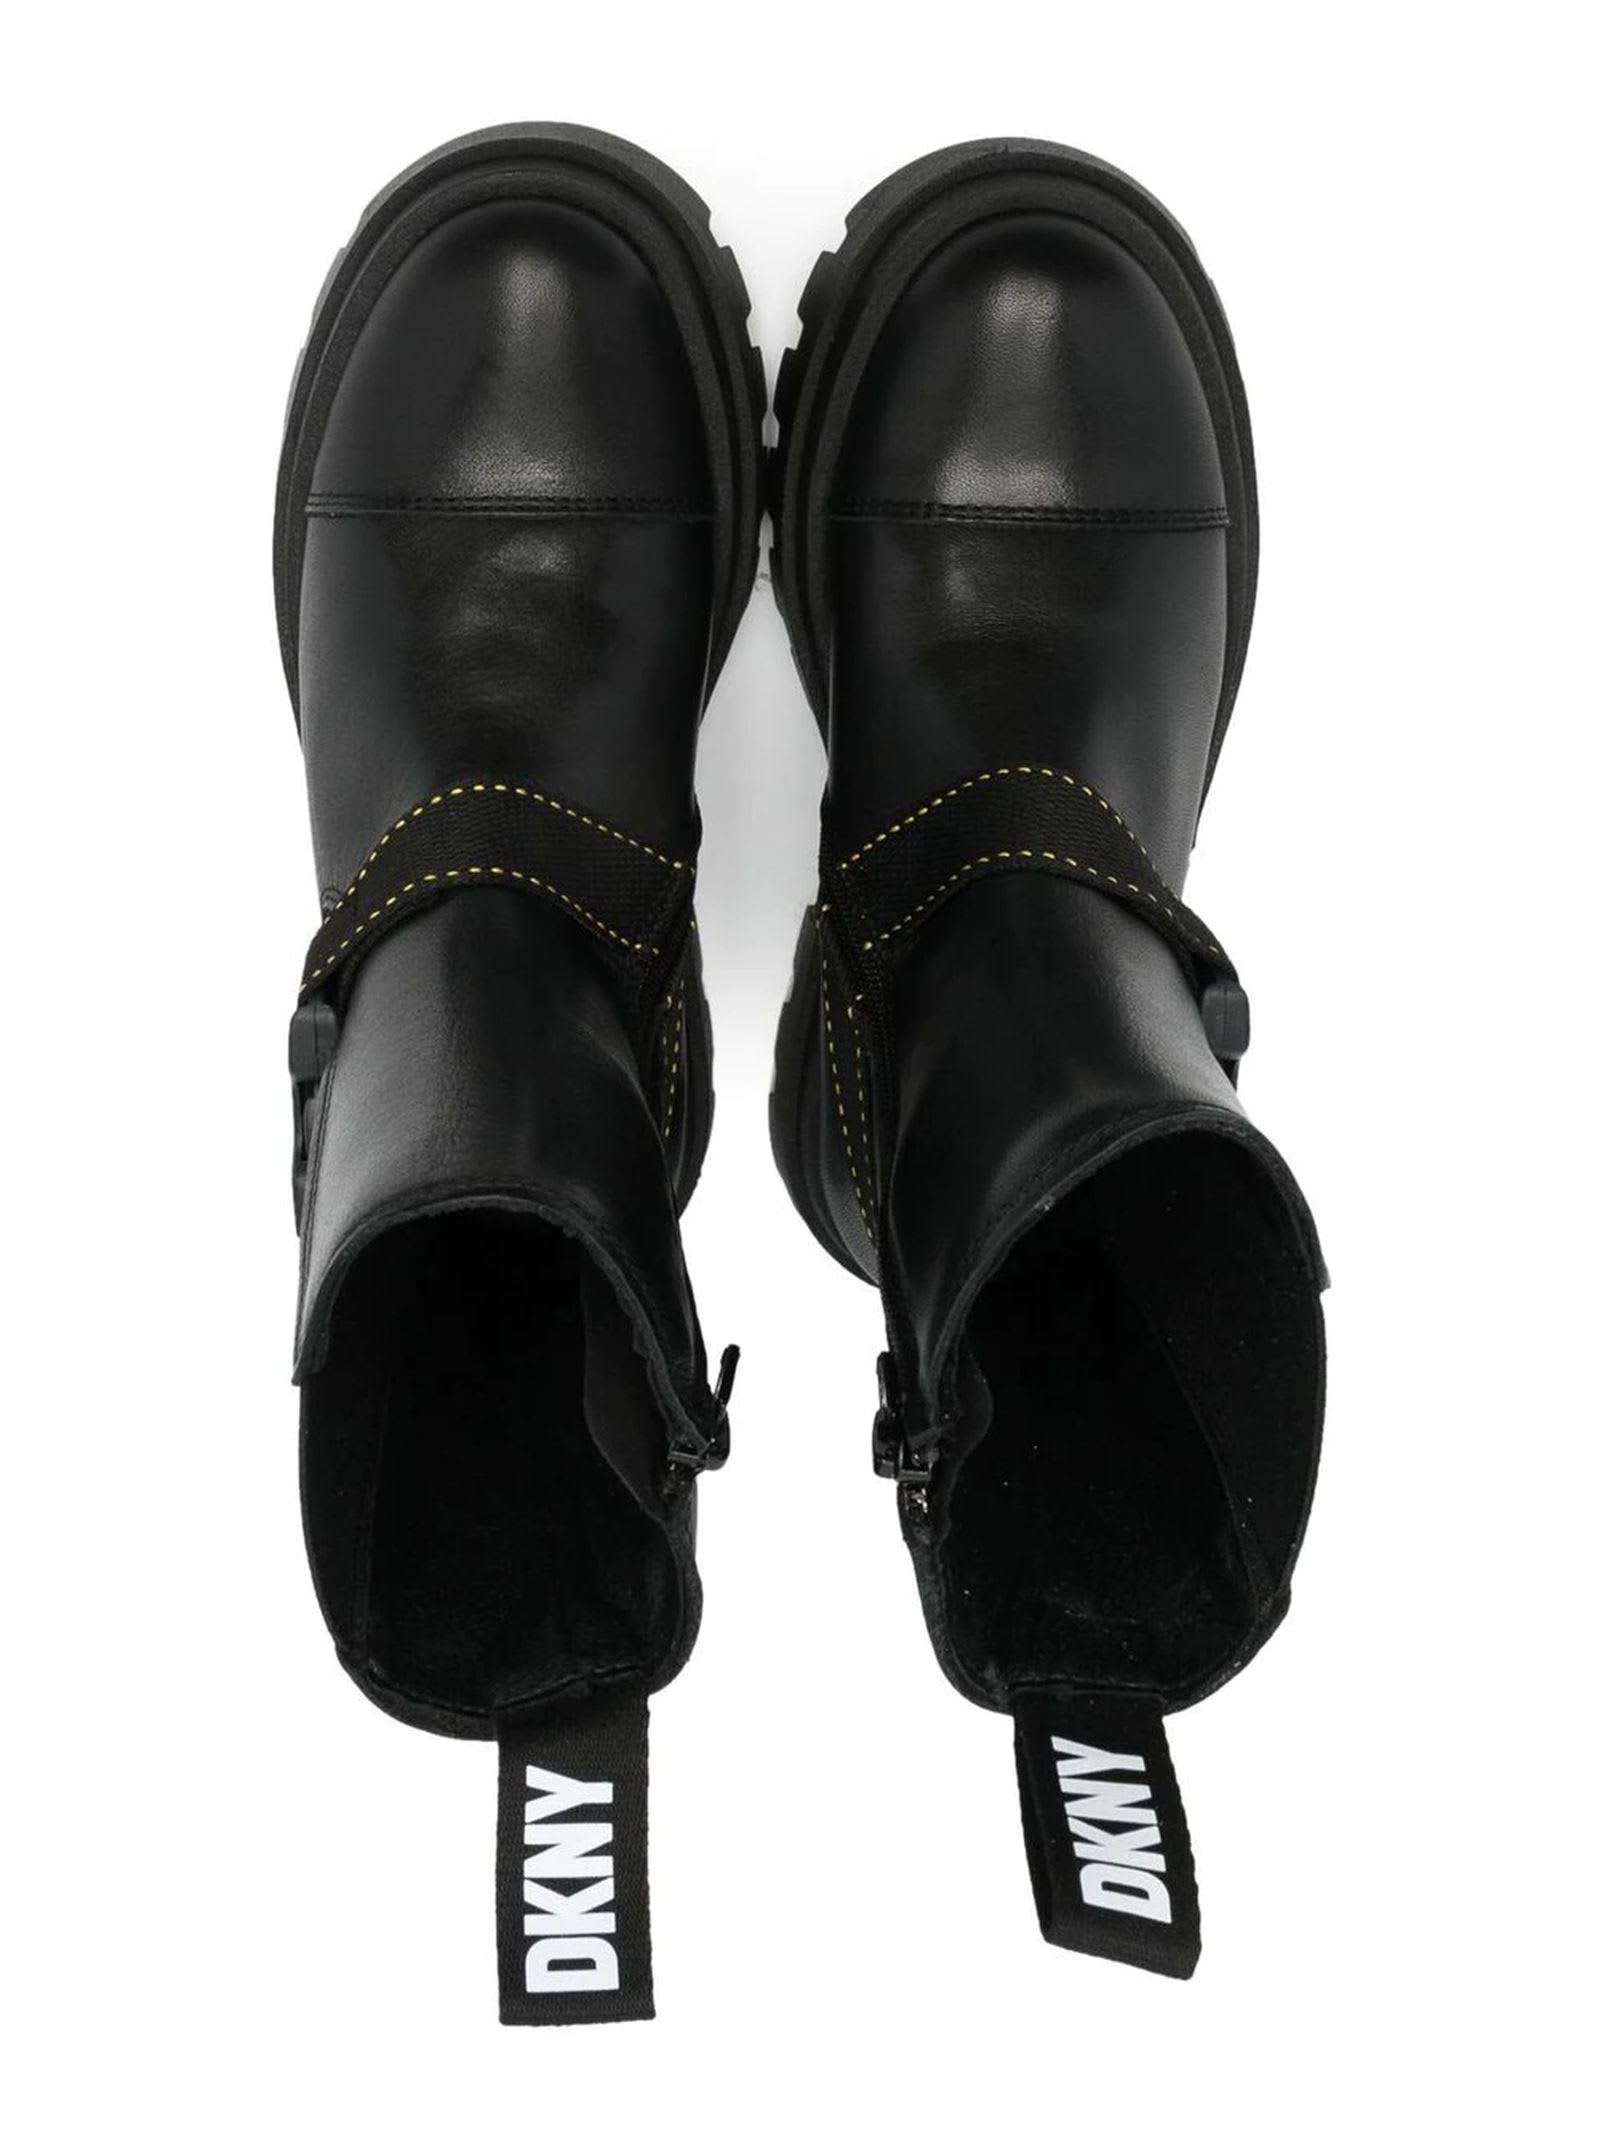 DKNY BLACK LEATHER BOOTS 